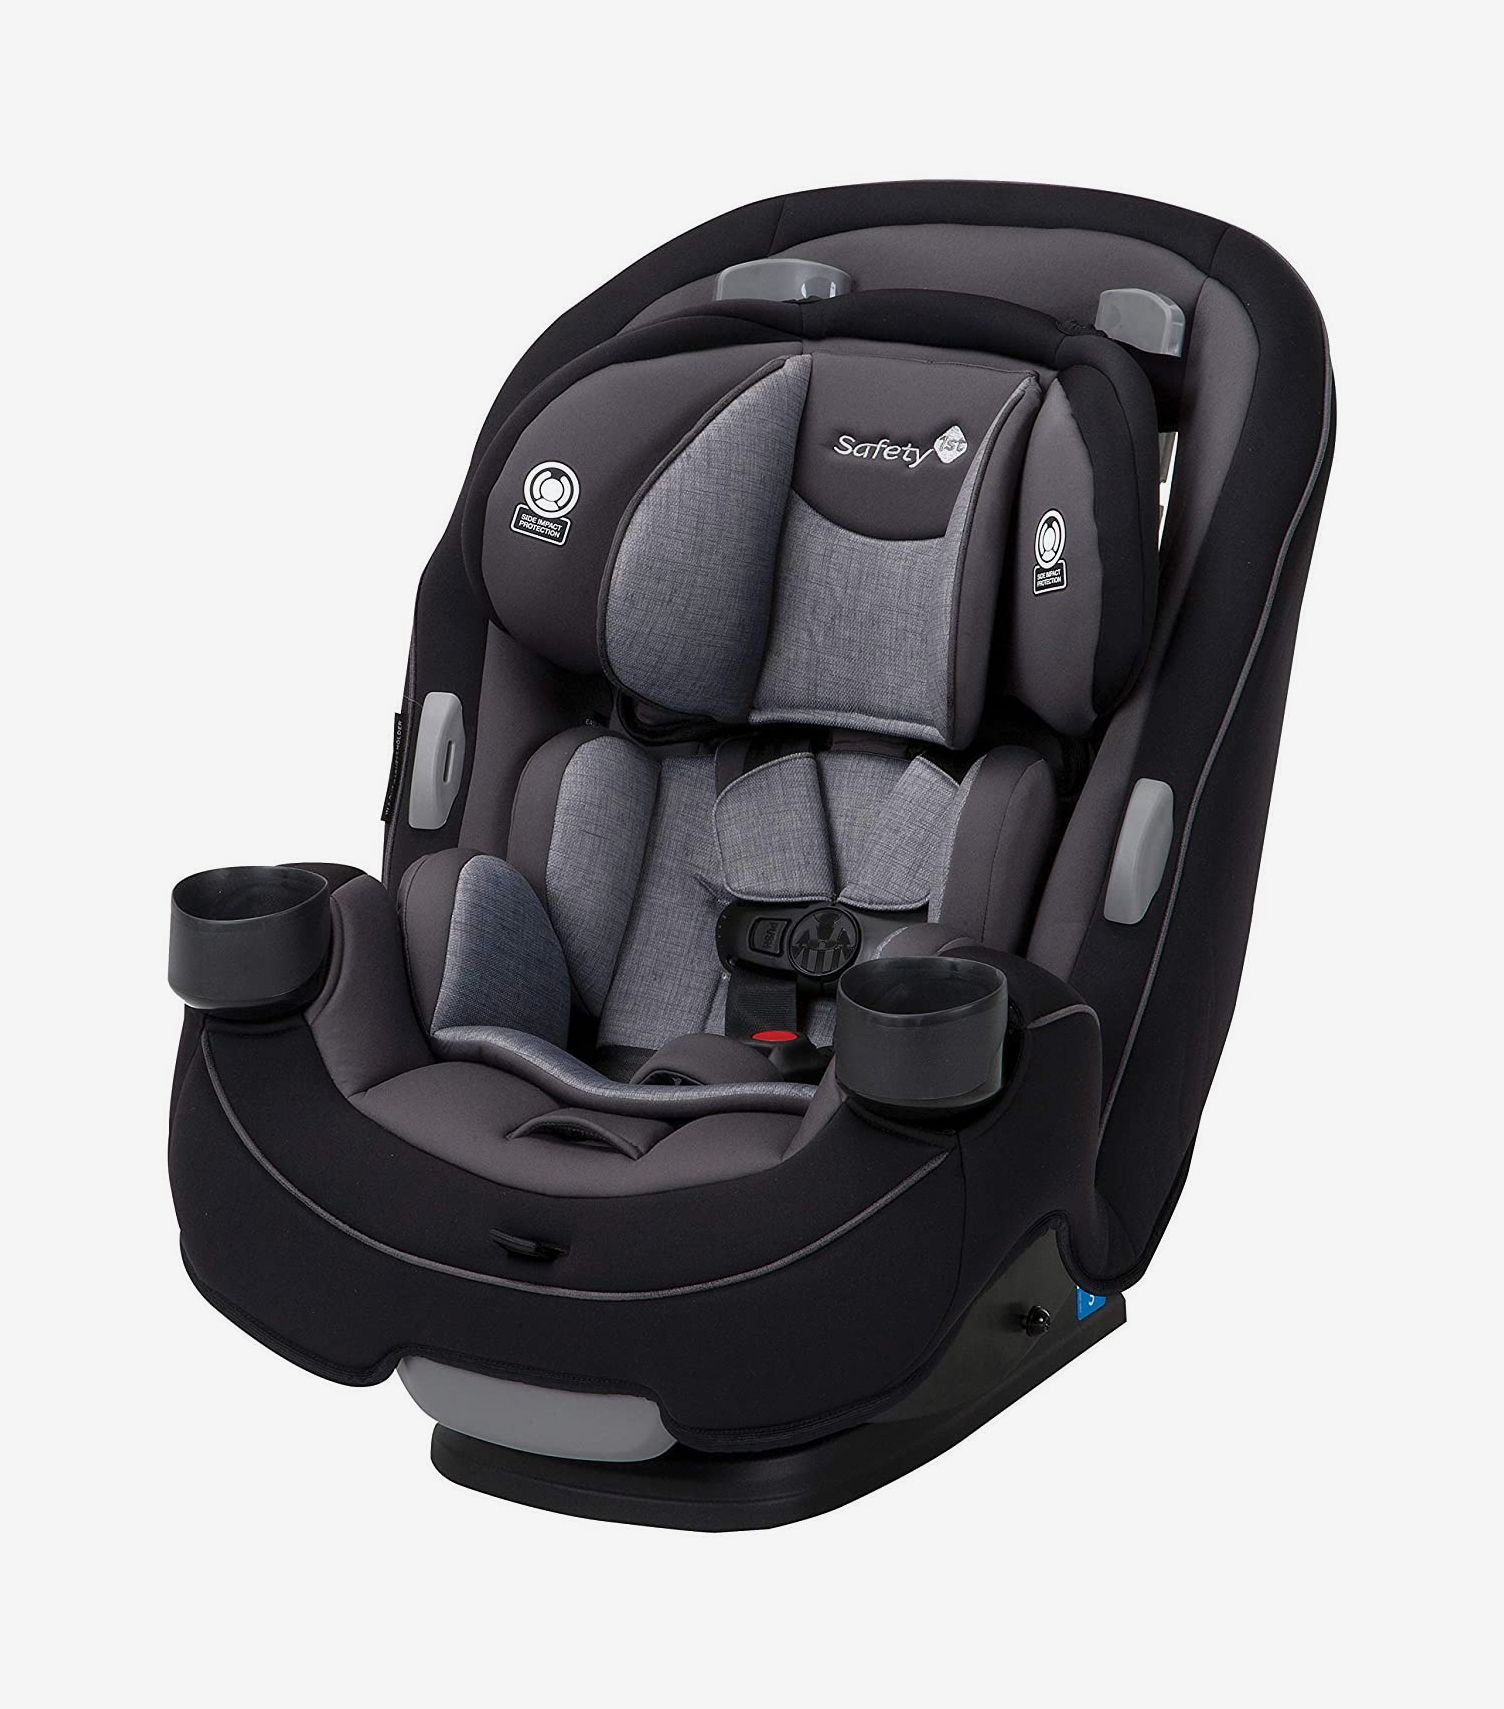 25 Best Infant Car Seats And Booster 2022 The Strategist - What Infant Car Seat Has The Highest Safety Rating